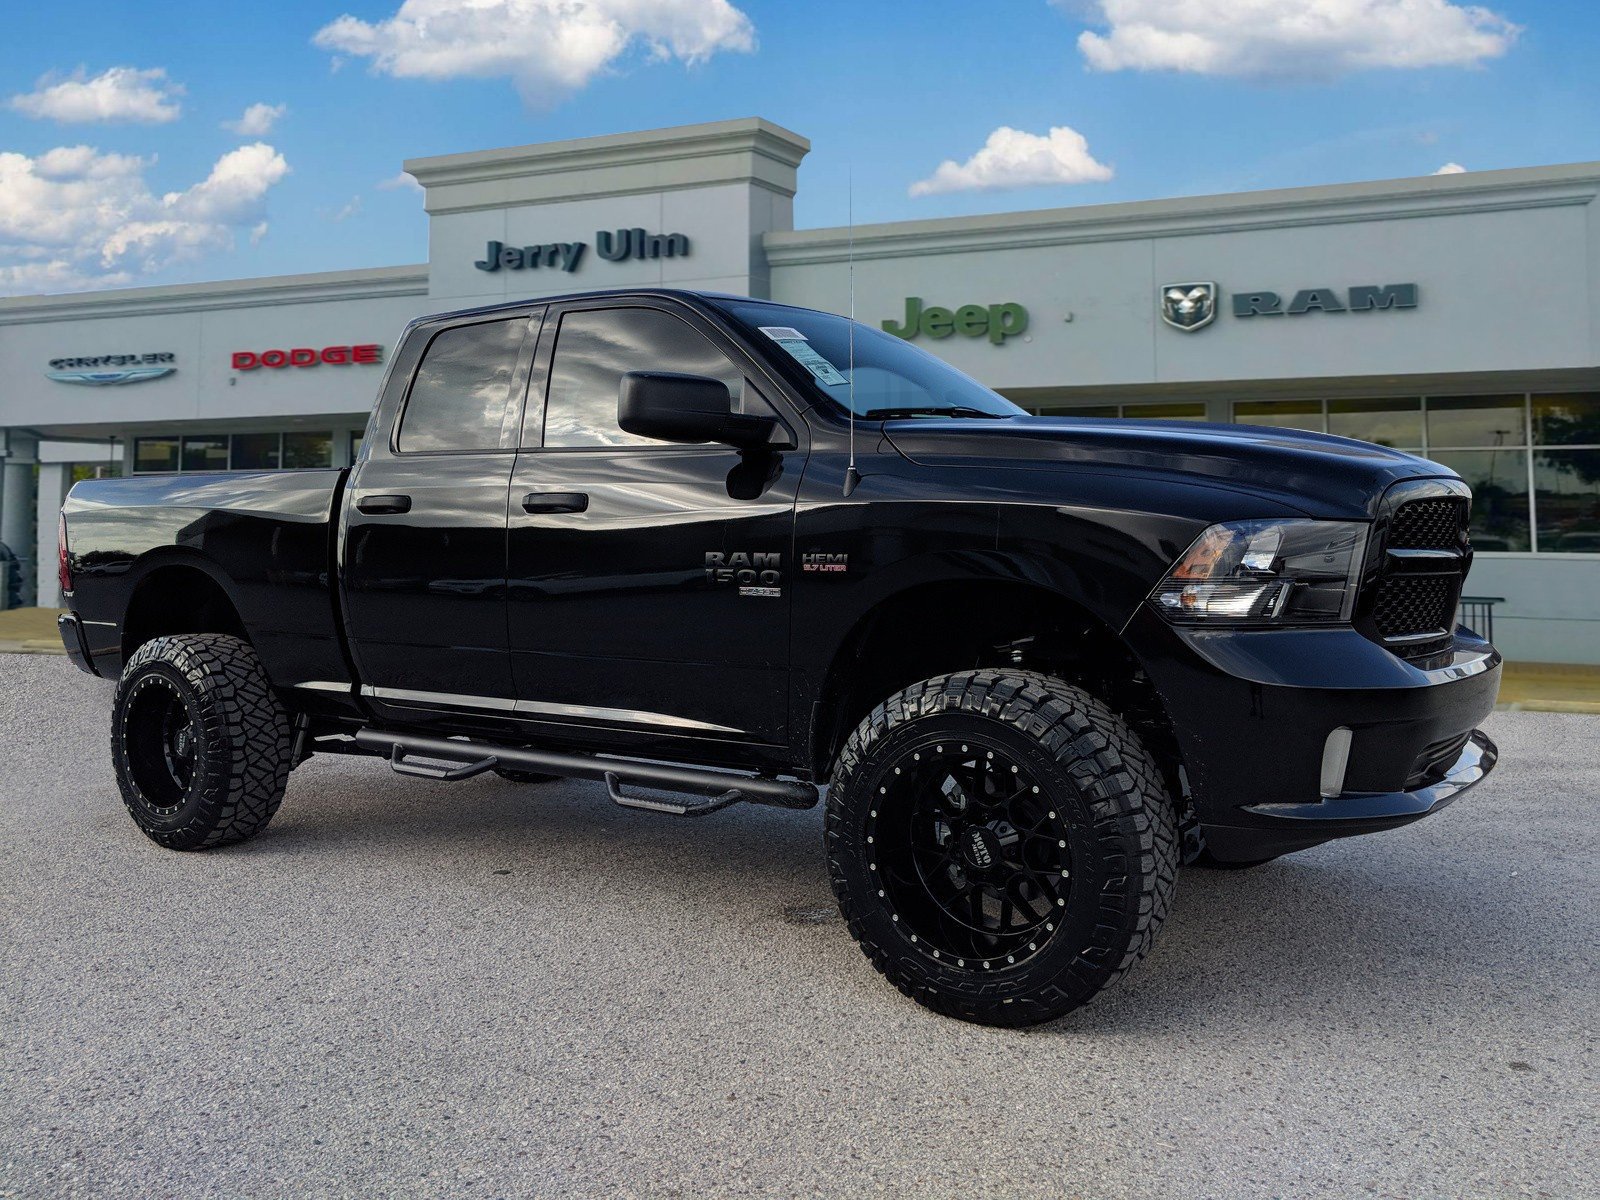 New 2019 RAM 1500 Classic Express Quad Cab in Tampa #S531353 | Jerry Ulm Chrysler, Dodge, Jeep, Ram 2019 Dodge Ram 1500 Classic Tire Size